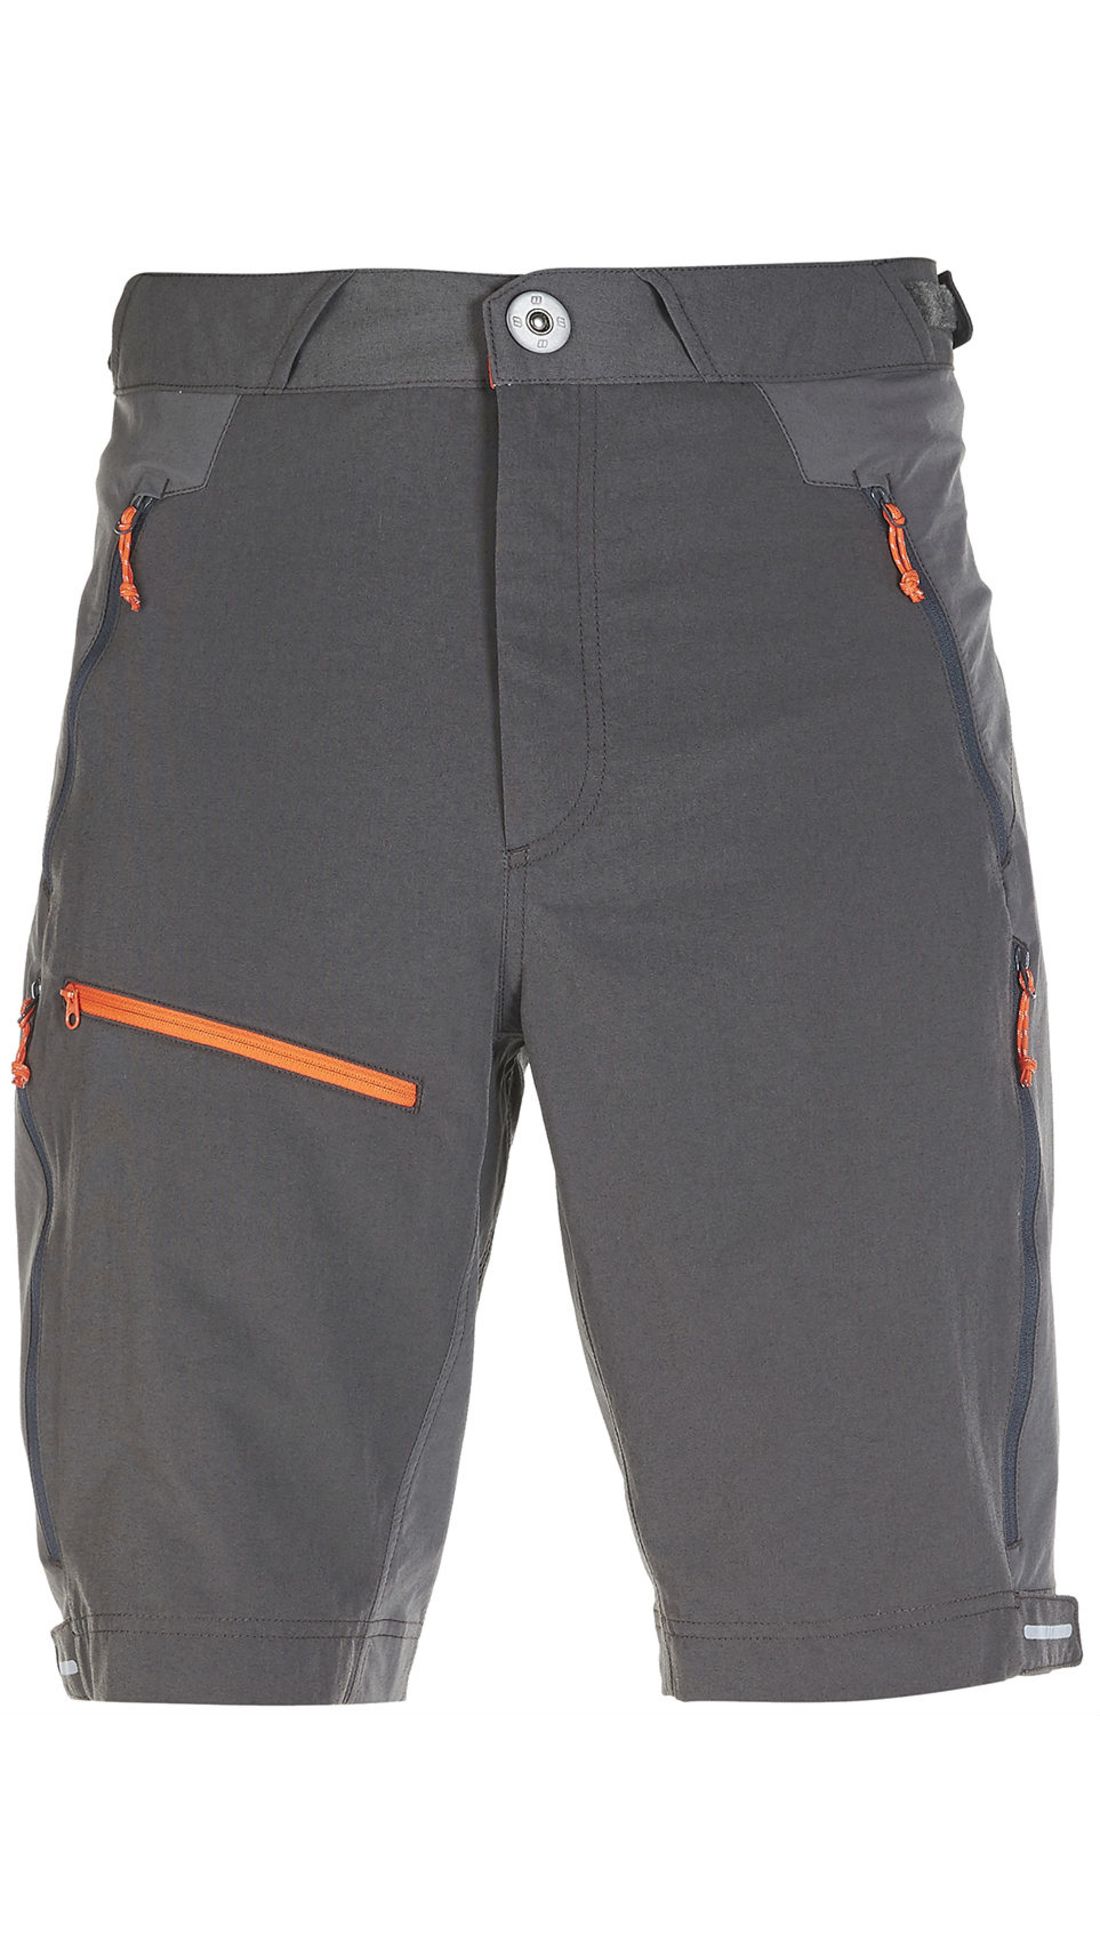 Berghaus Baggy Short - Mens | Free Shipping over $49!